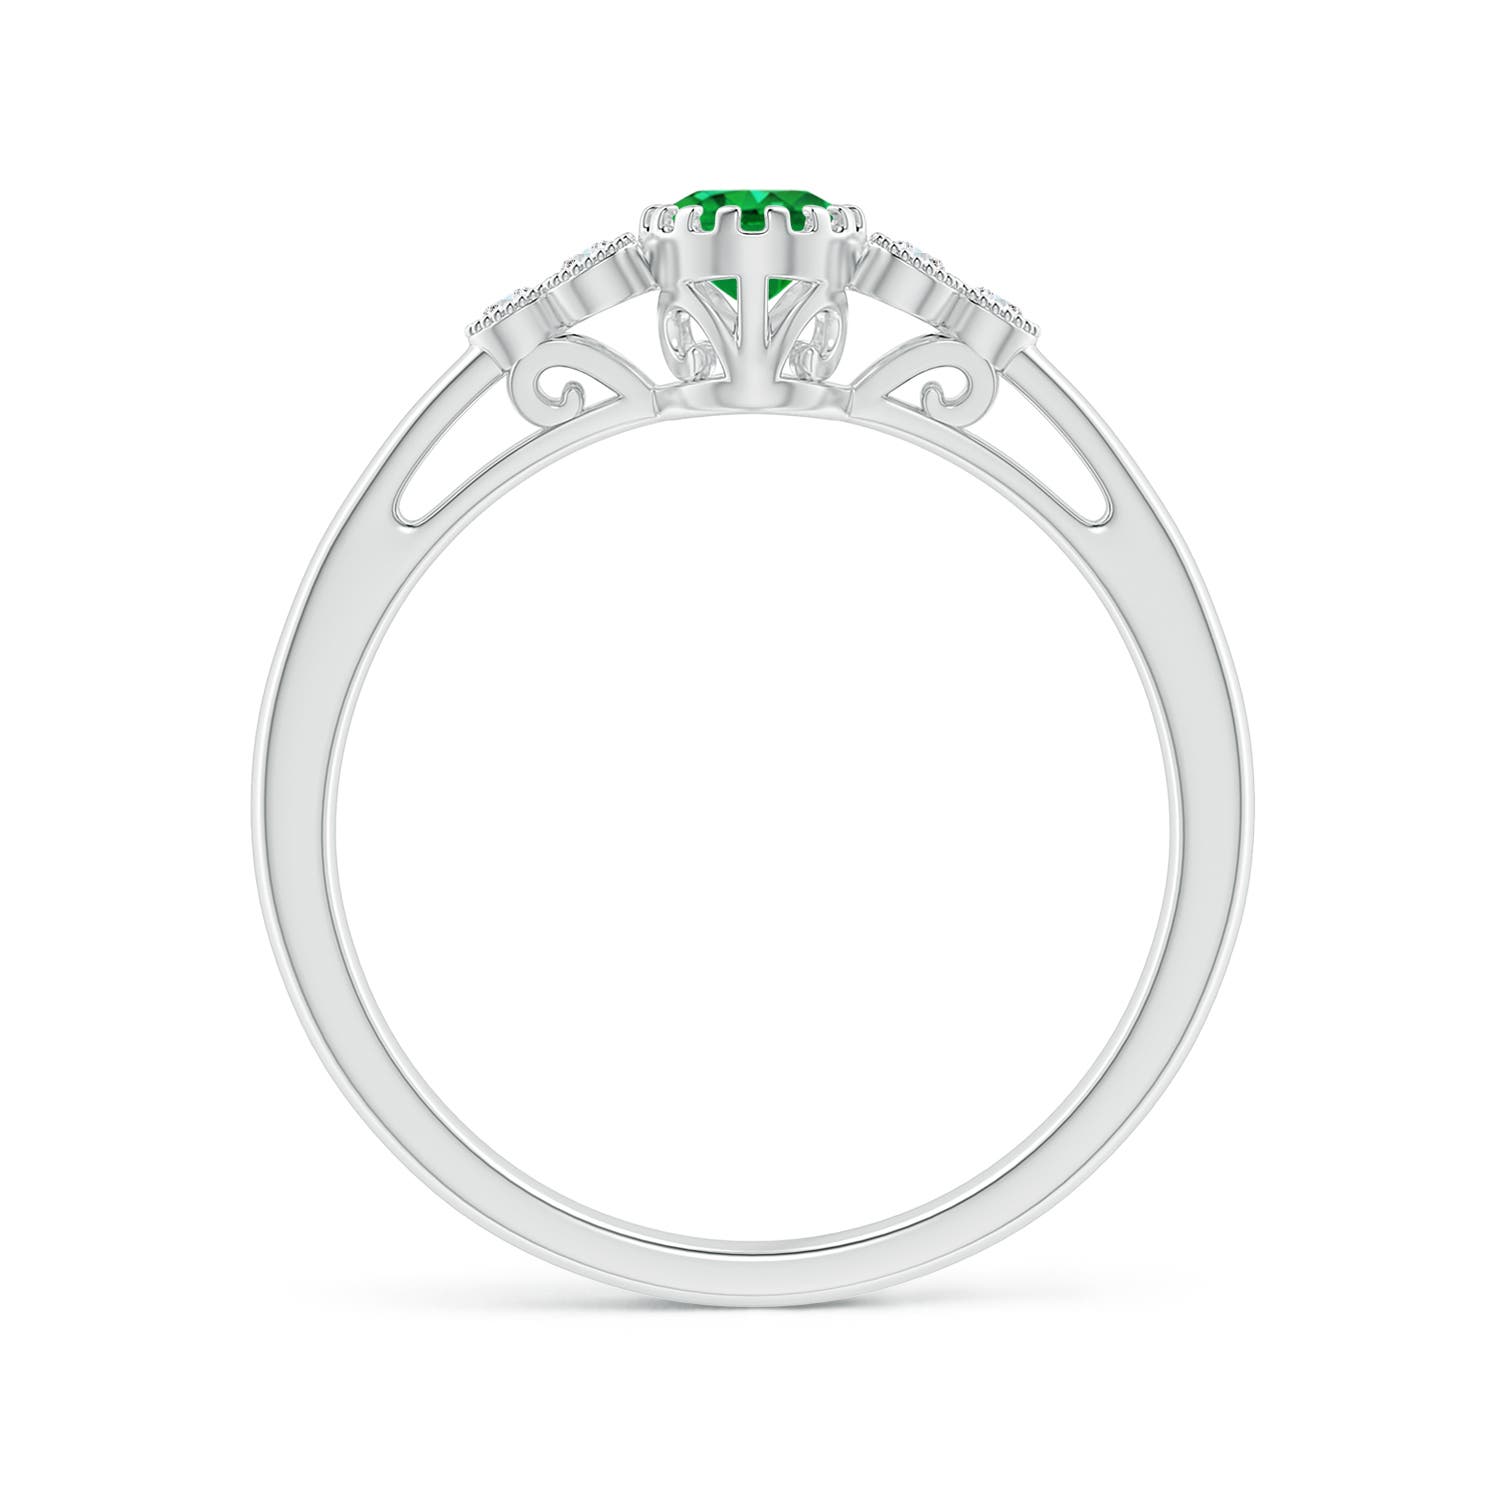 AAA - Emerald / 0.48 CT / 14 KT White Gold